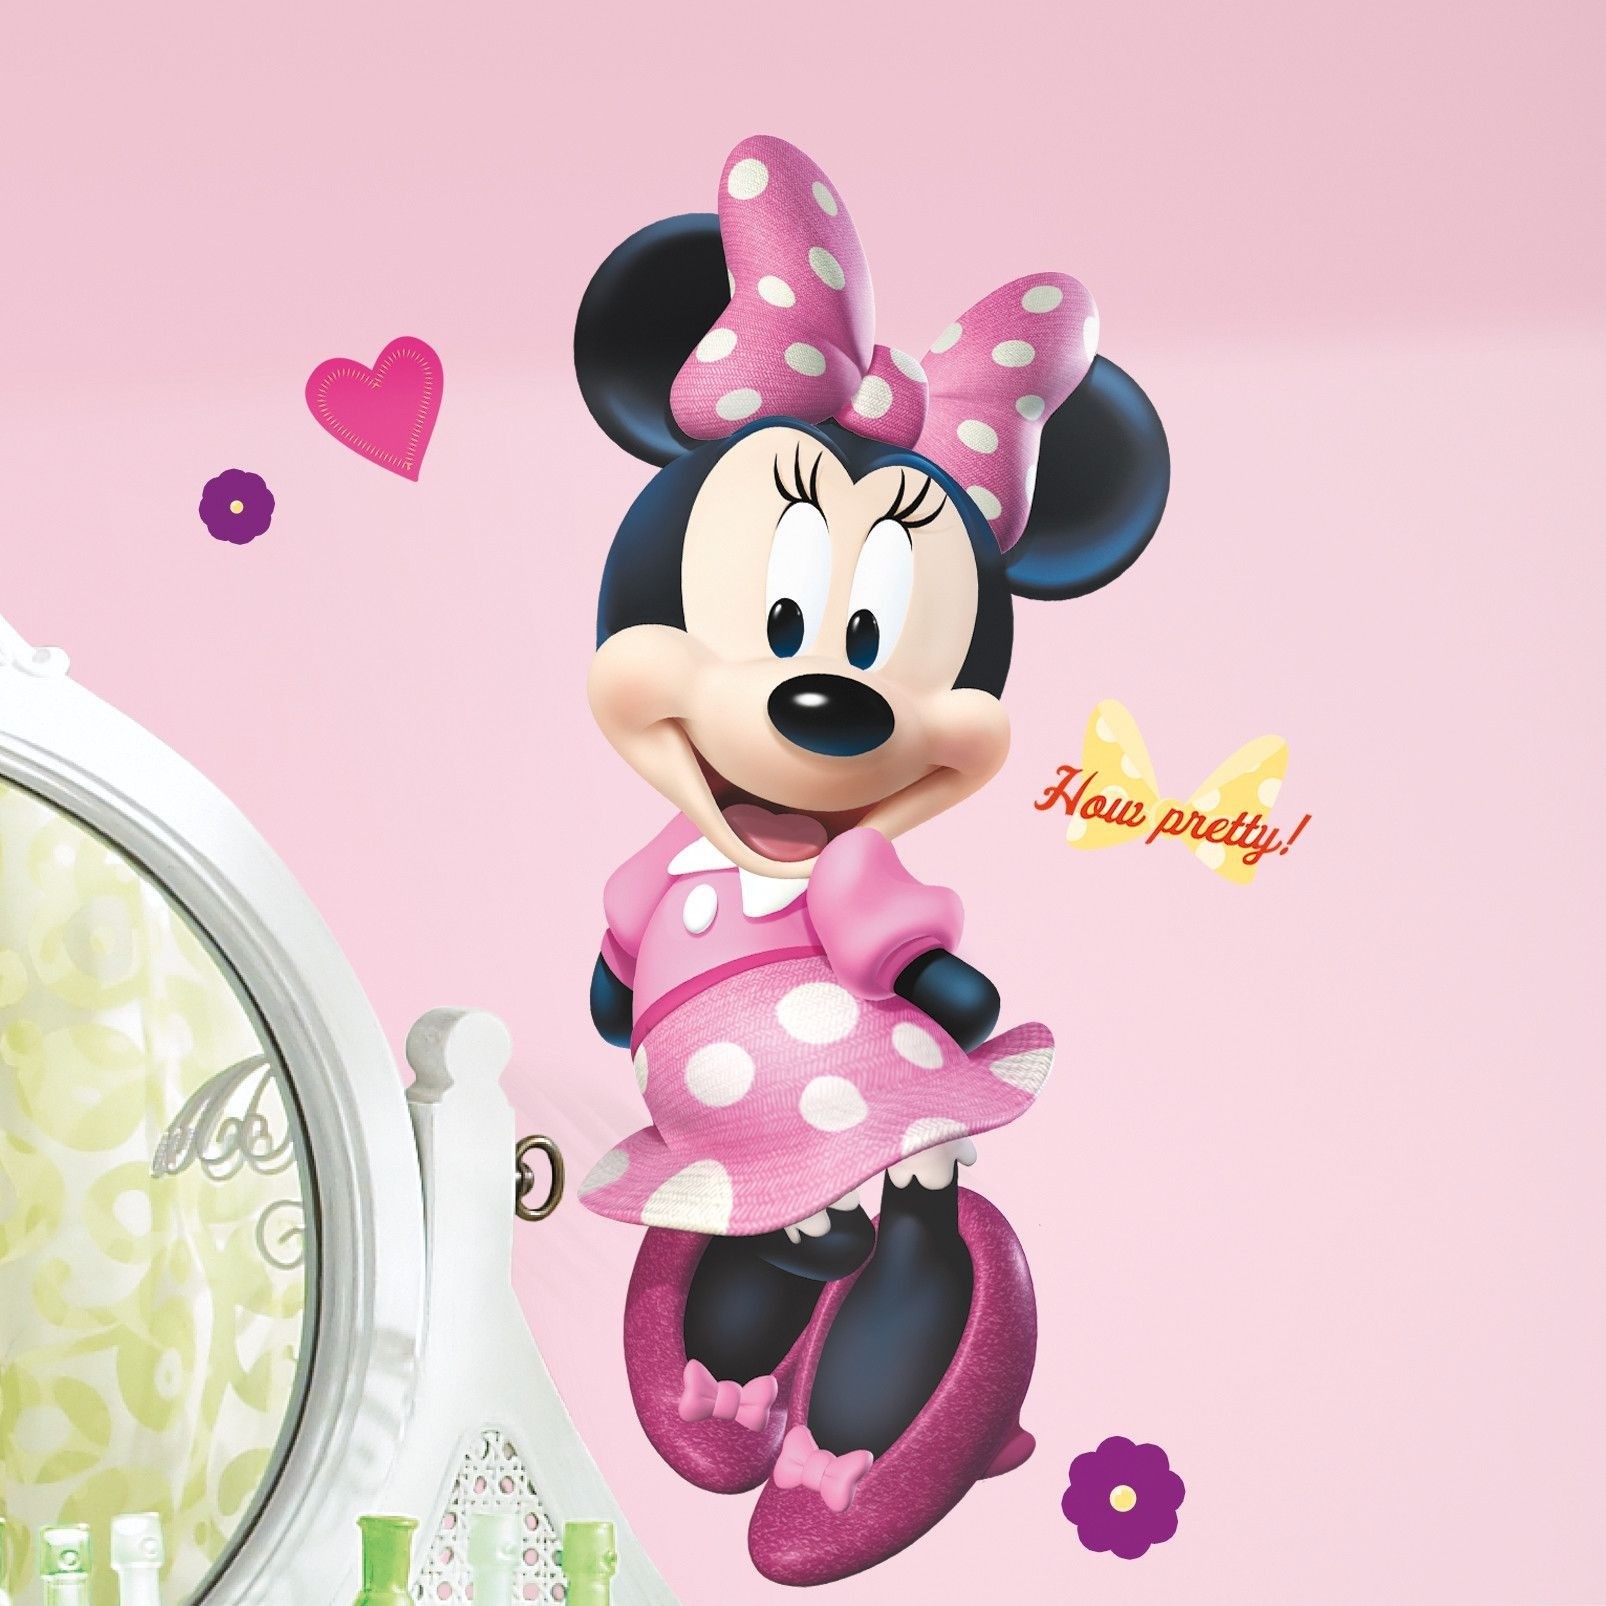 Popular Characters Mickey and Friends Minnie Bowtique Giant Wall Decal